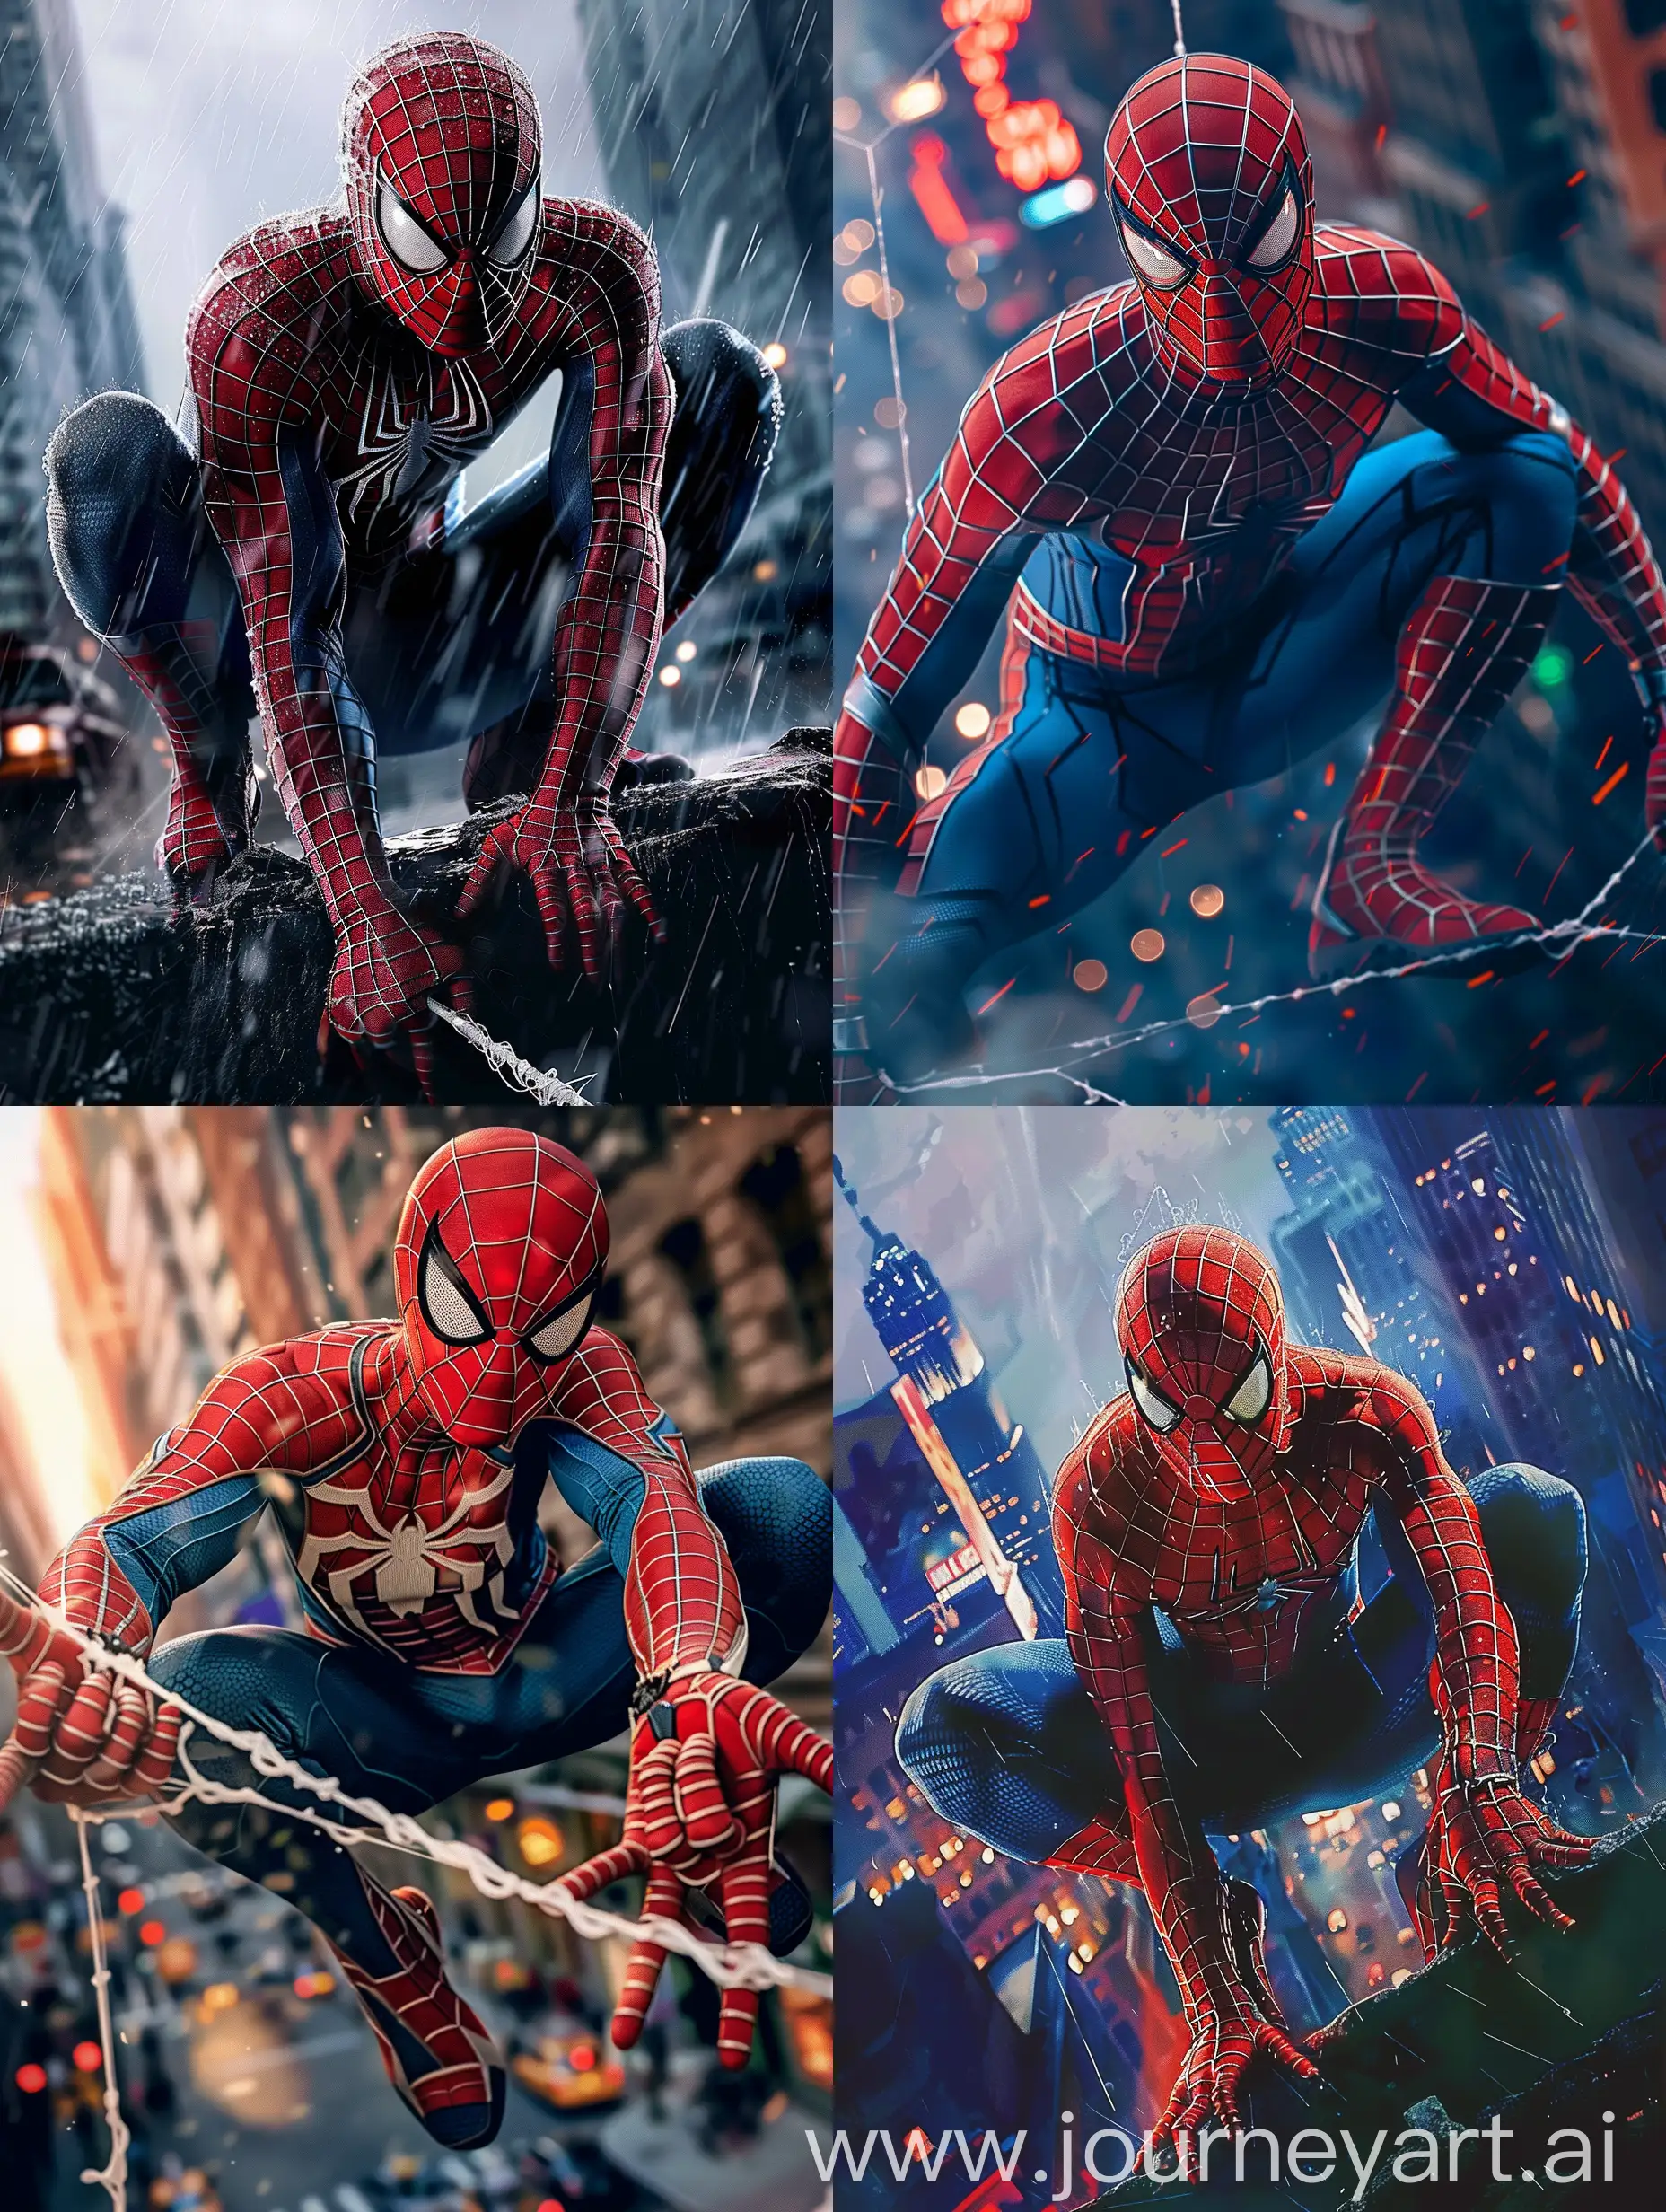 create me a spiderman film poster
